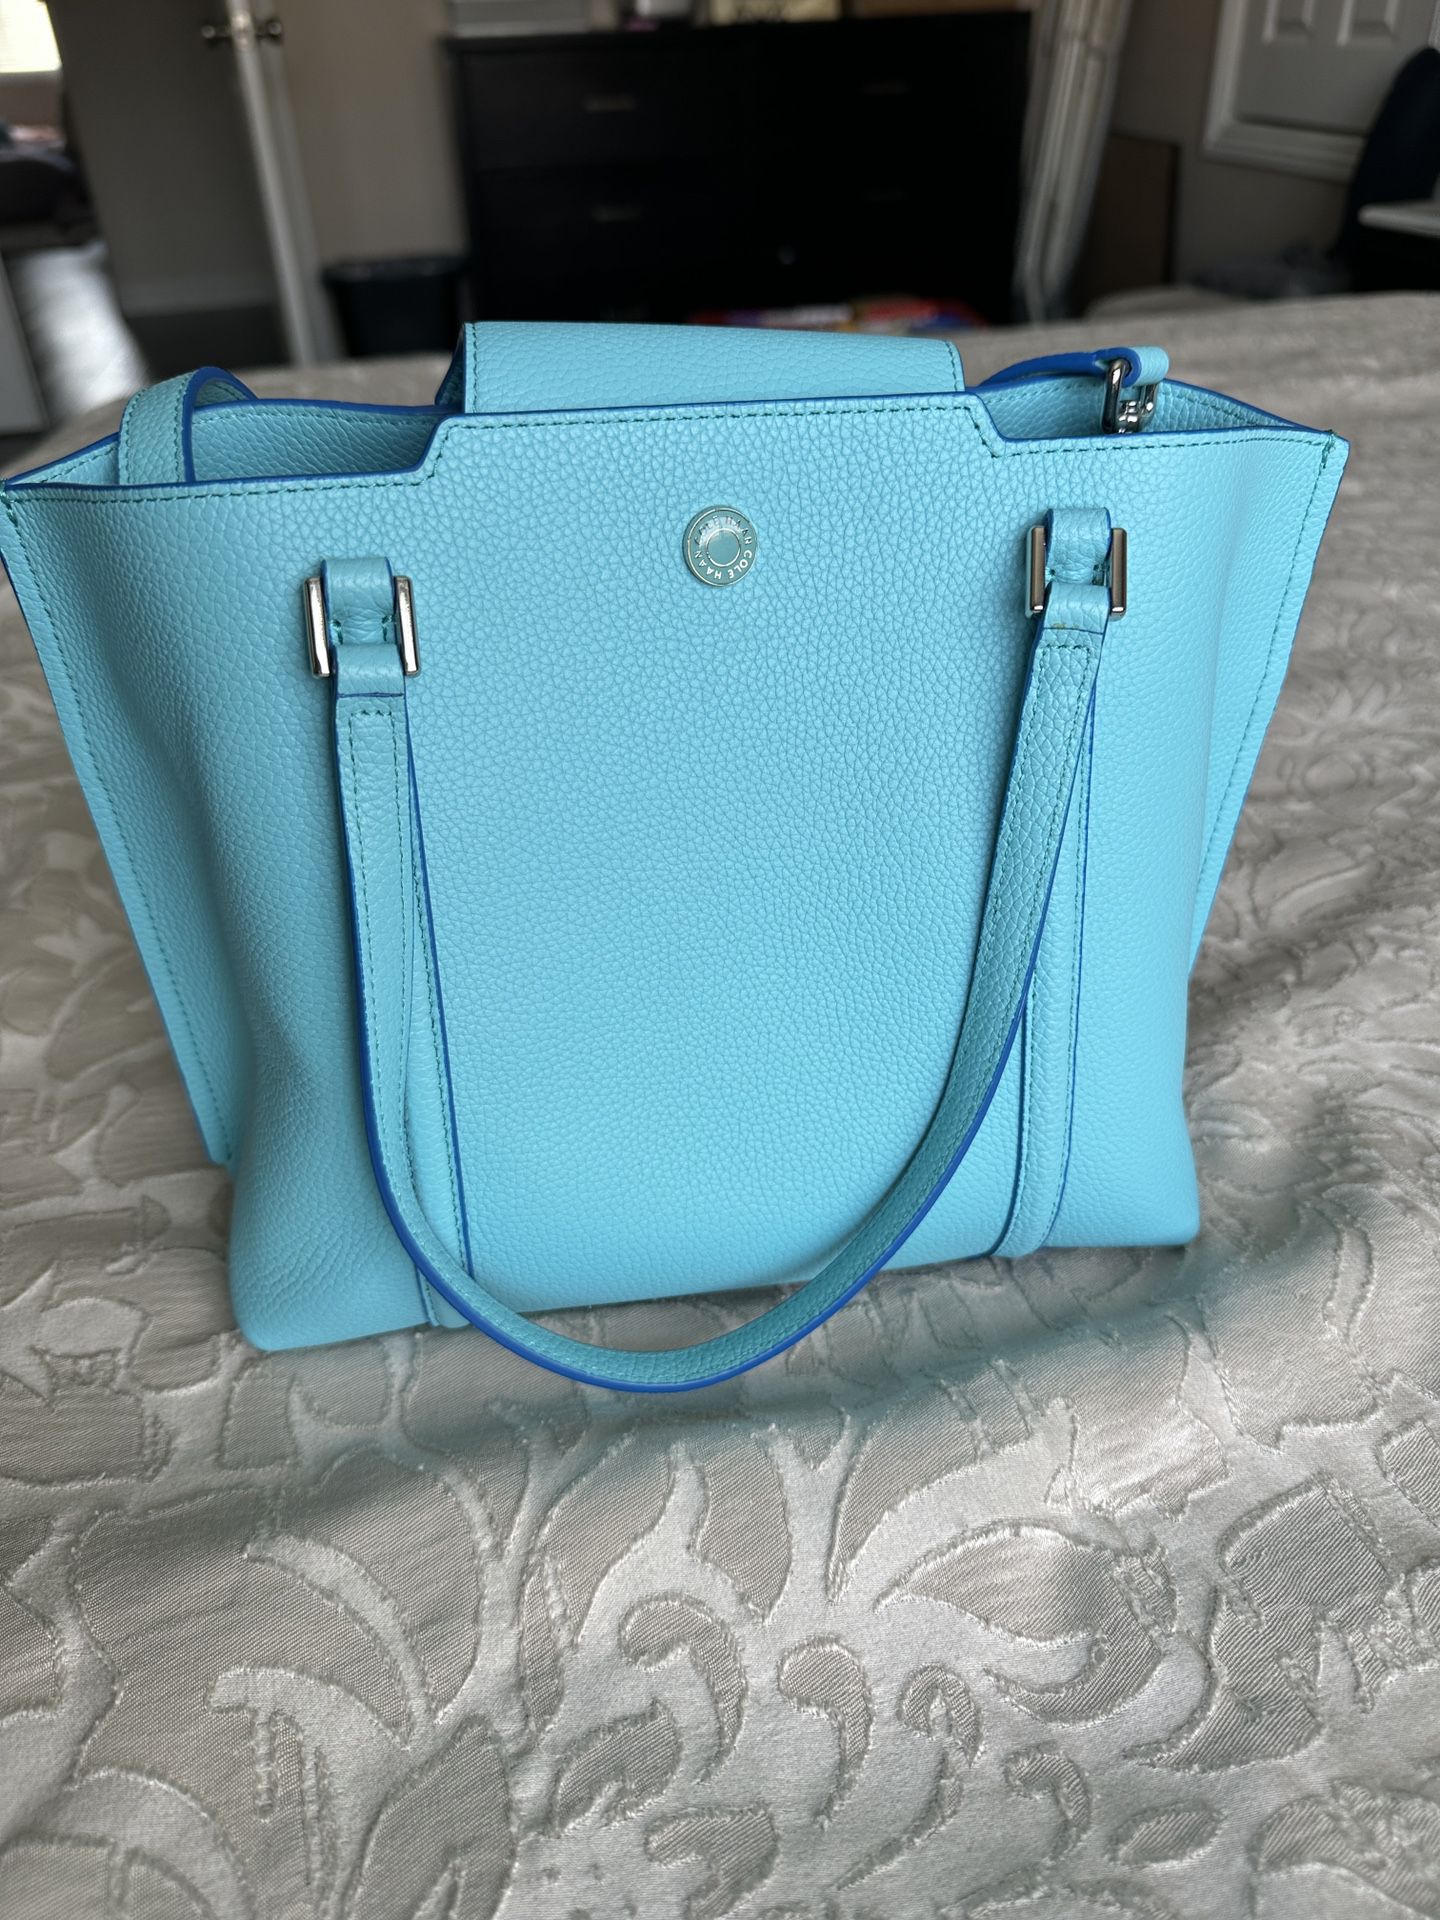 Authentic Brand New Cole Haan Cross Body Purse In Teal